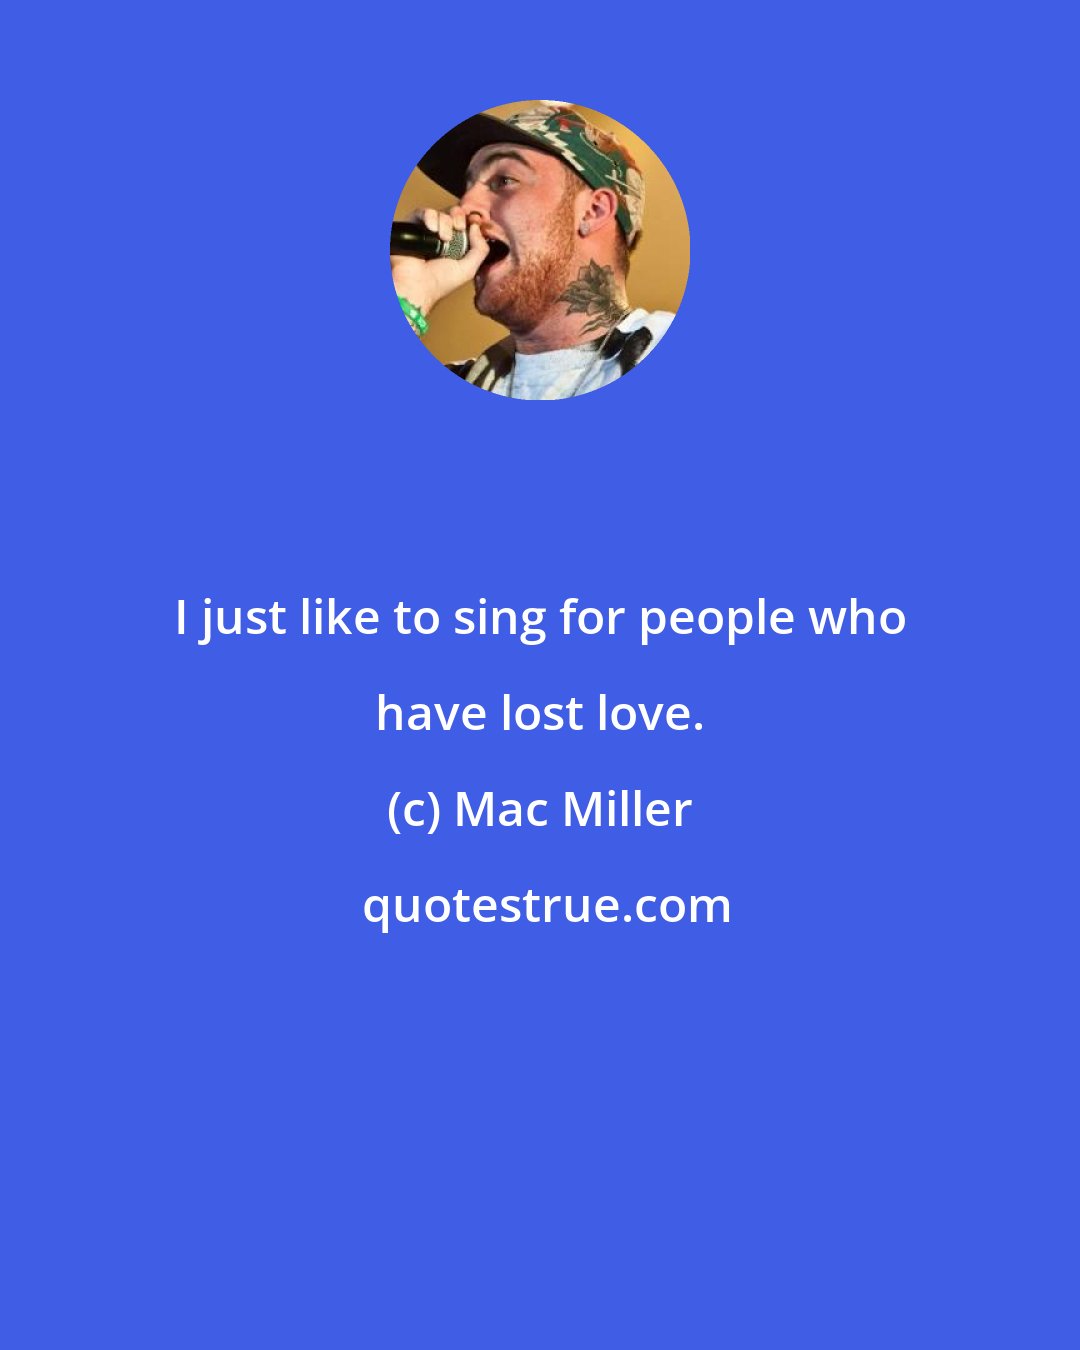 Mac Miller: I just like to sing for people who have lost love.